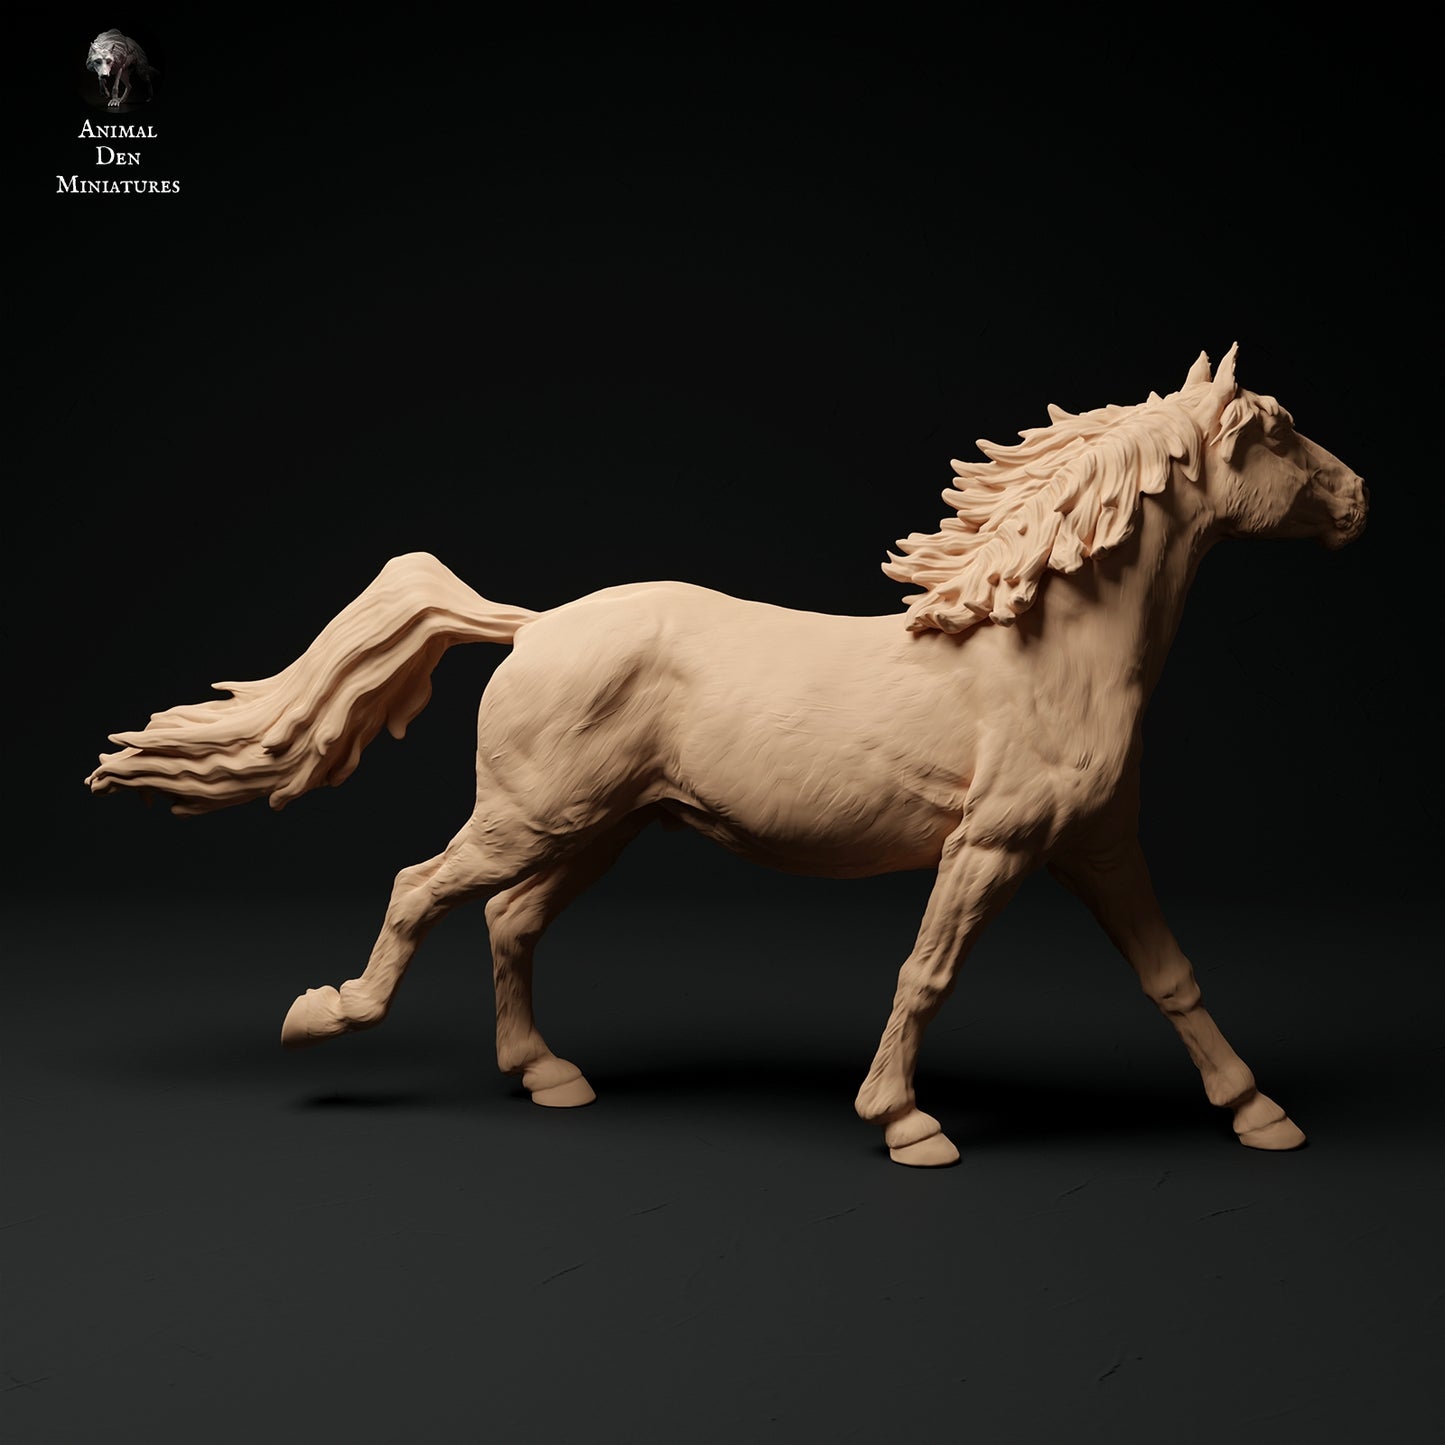 Cantering konik horse - white resin - ready to prep / paint - many options